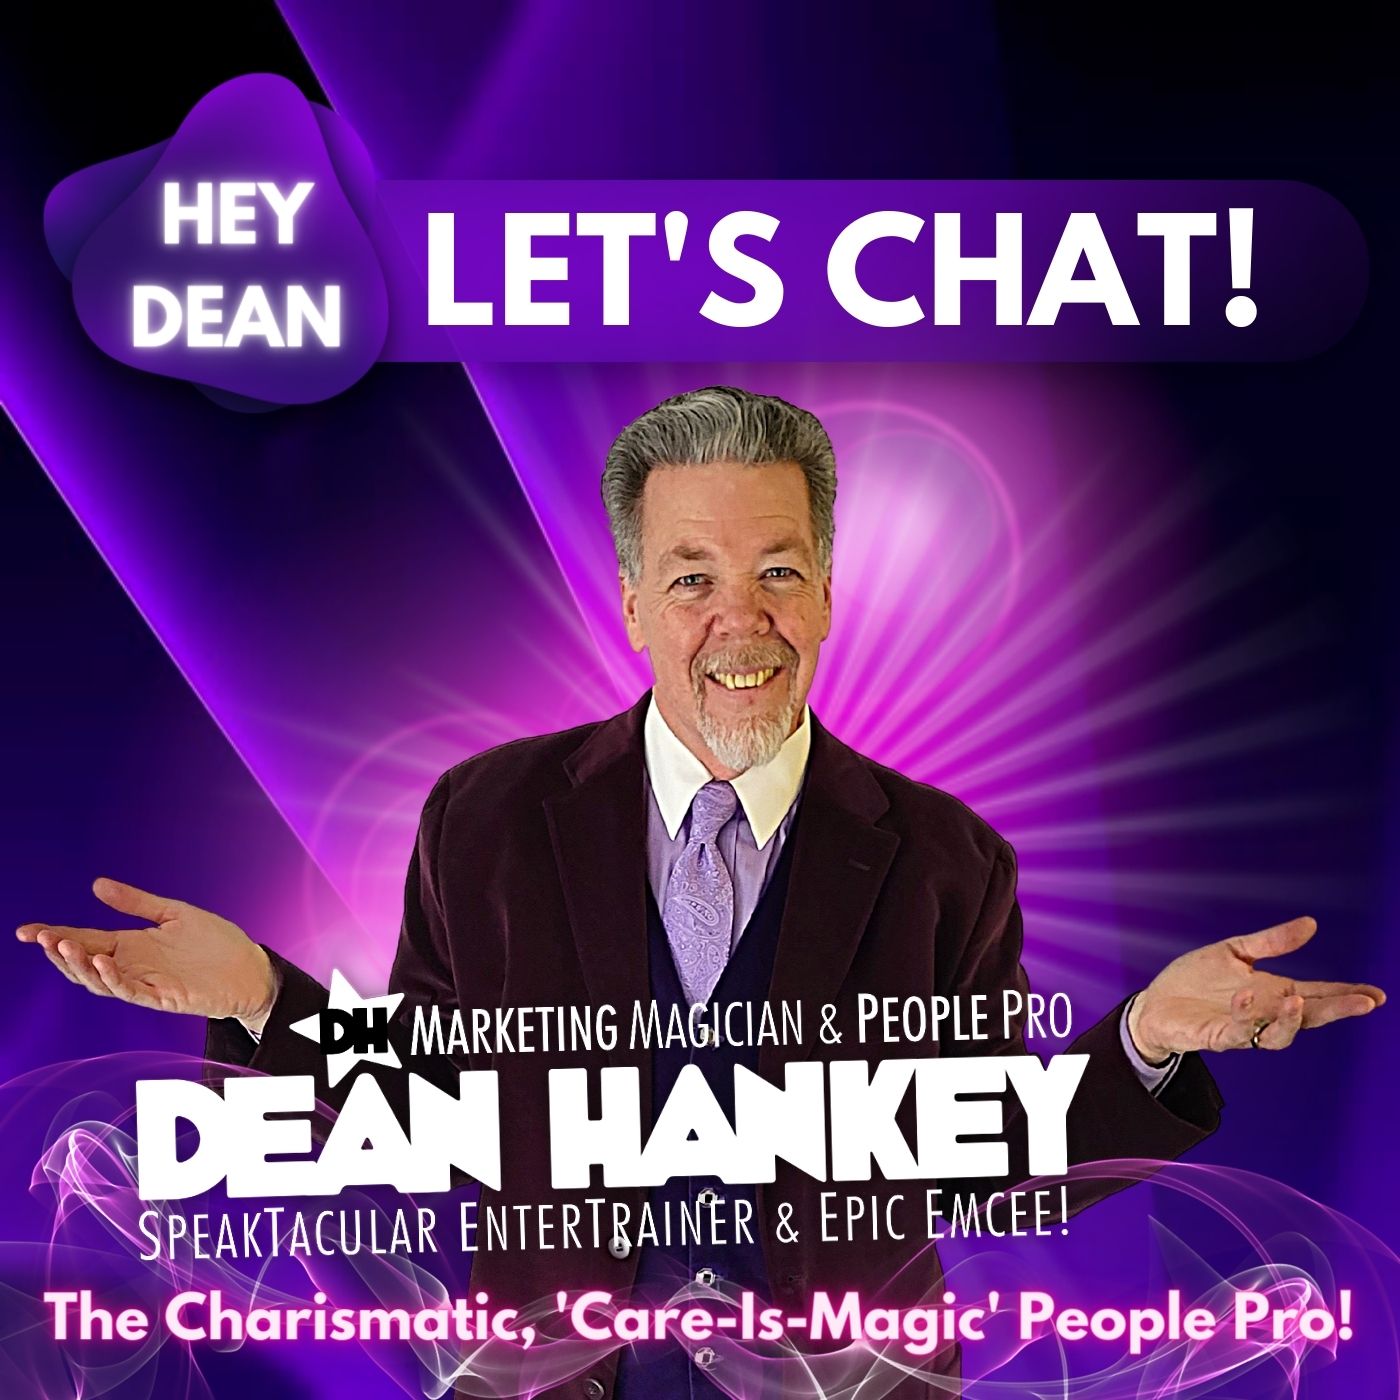 Dean Hankey, The DEAN of Success!, VIP, 'Care-Is-Magic' Marketing Magician & People Pro! - Chat With Dean